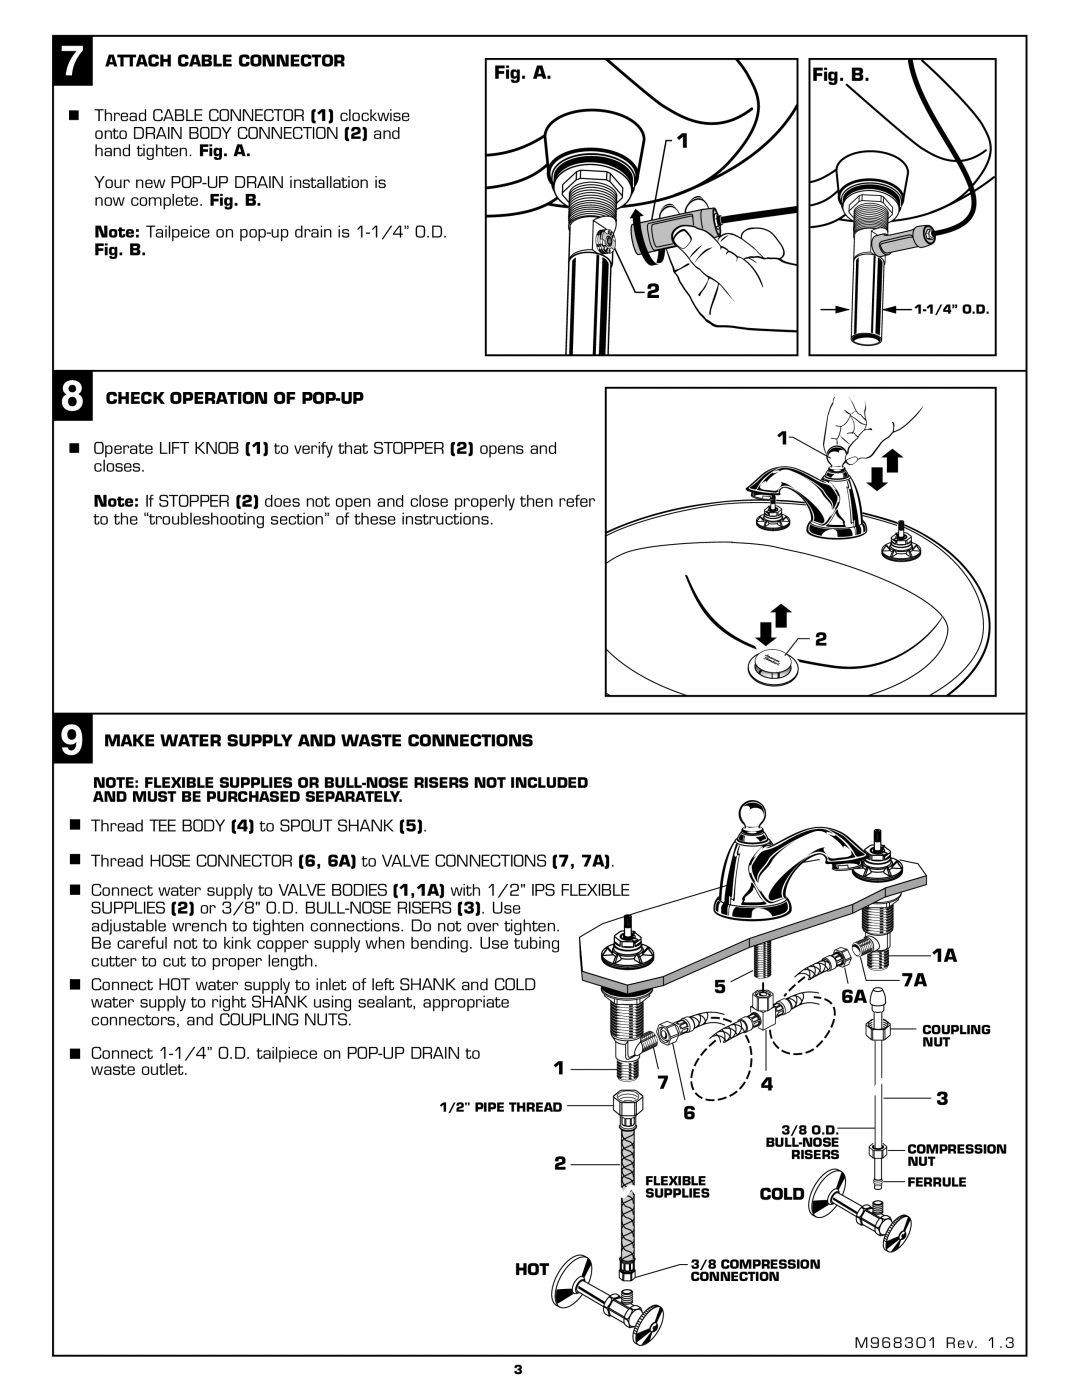 American Standard 2373.821 installation instructions Fig. A 